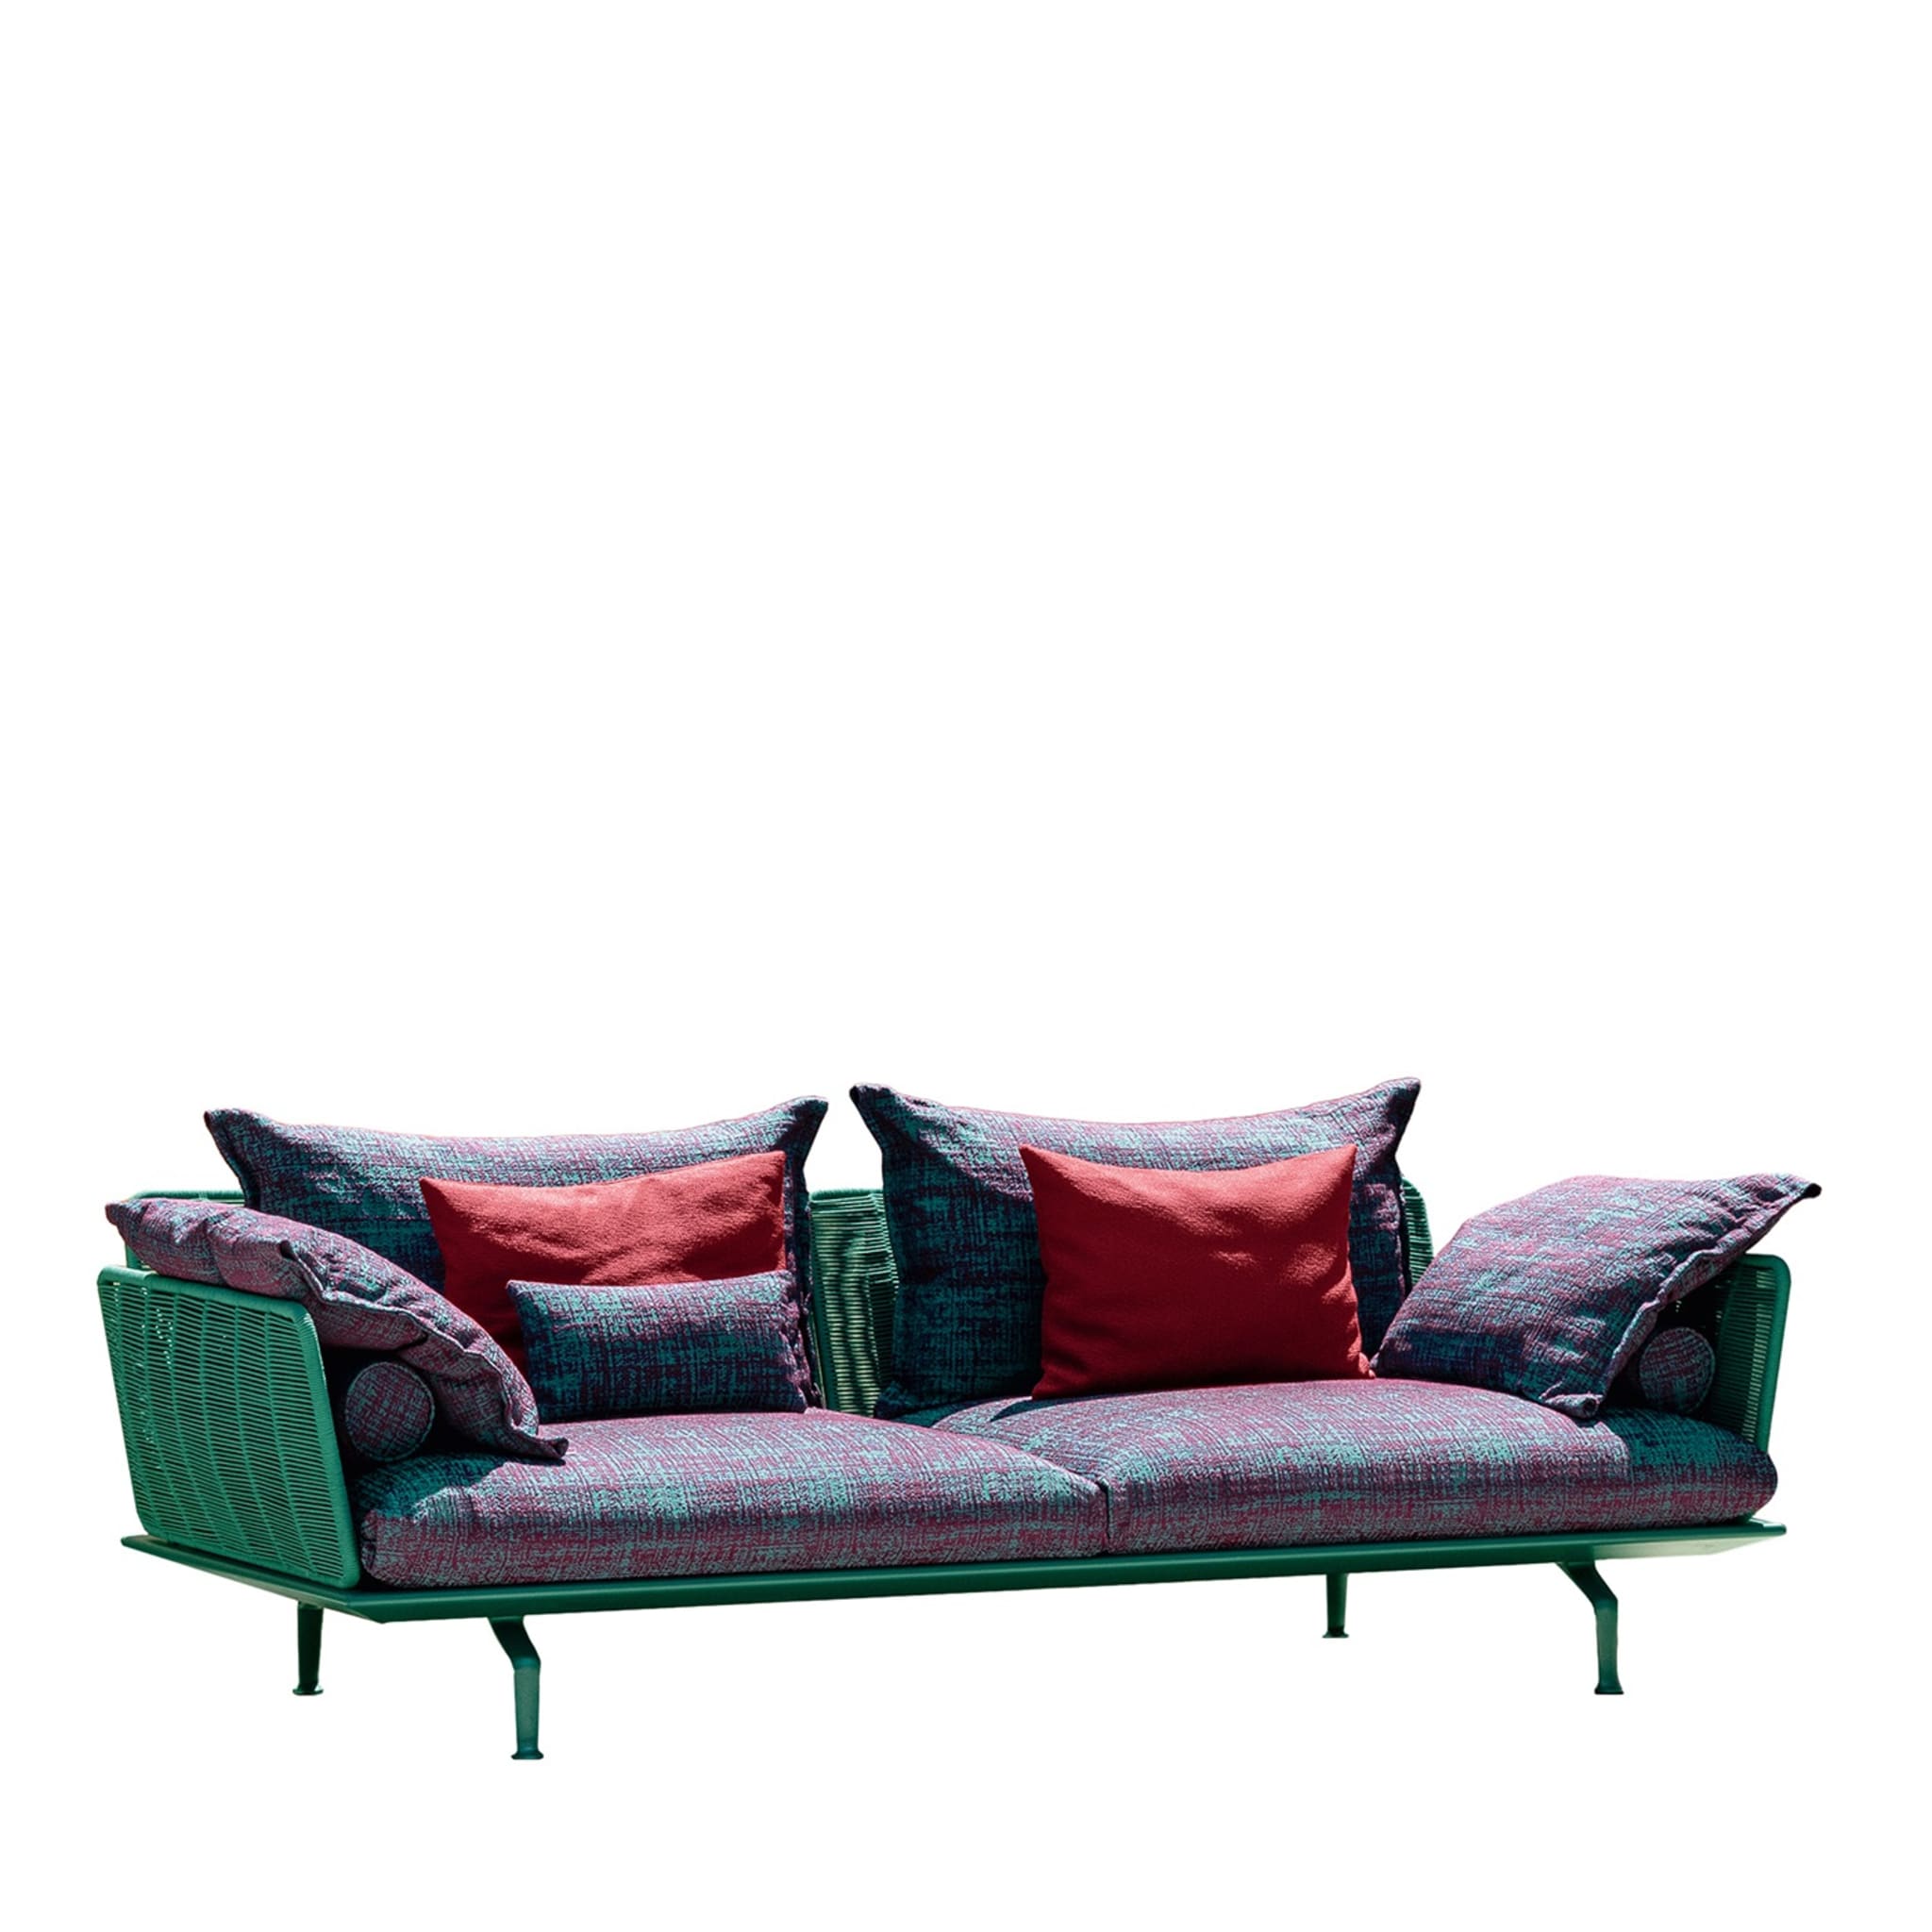 Cruise Alu 3-Seater Polychrome Sofa by L. & R. Palomba - Main view